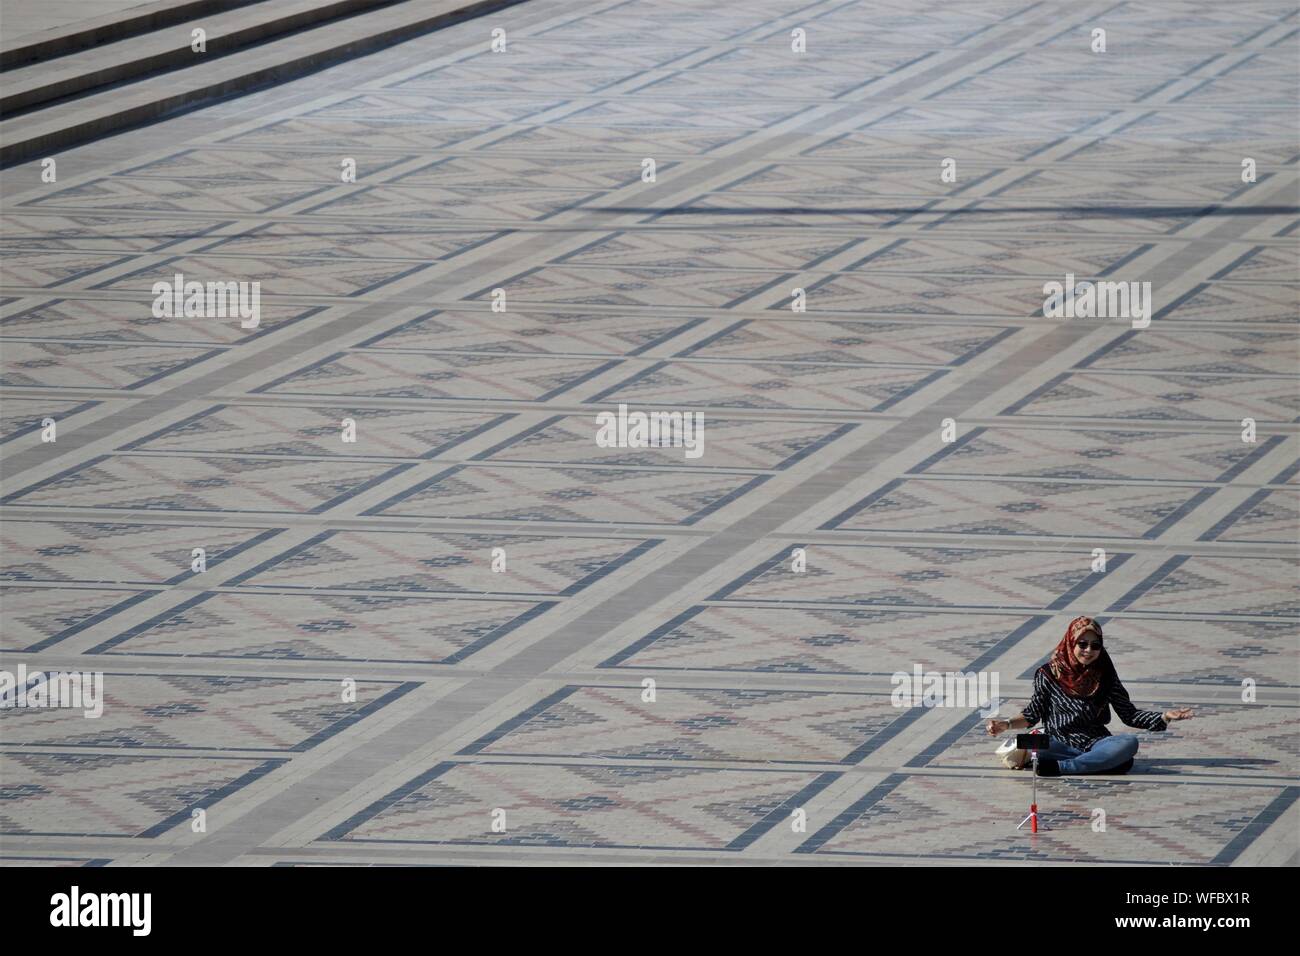 Ankara, Turkey. 31st Aug, 2019. A tourist sets up a scene for selfie at Anitkabir, the mausoleum of modern Turkey's founder Mustafa Kemal Ataturk, a day after the 97th anniversary of Victory Day, which commemorates the defeat of the Greek forces at the hands of the Turks in the Battle of Dumlupinar in 1922. Credit: Altan Gocher/ZUMA Wire/Alamy Live News Stock Photo